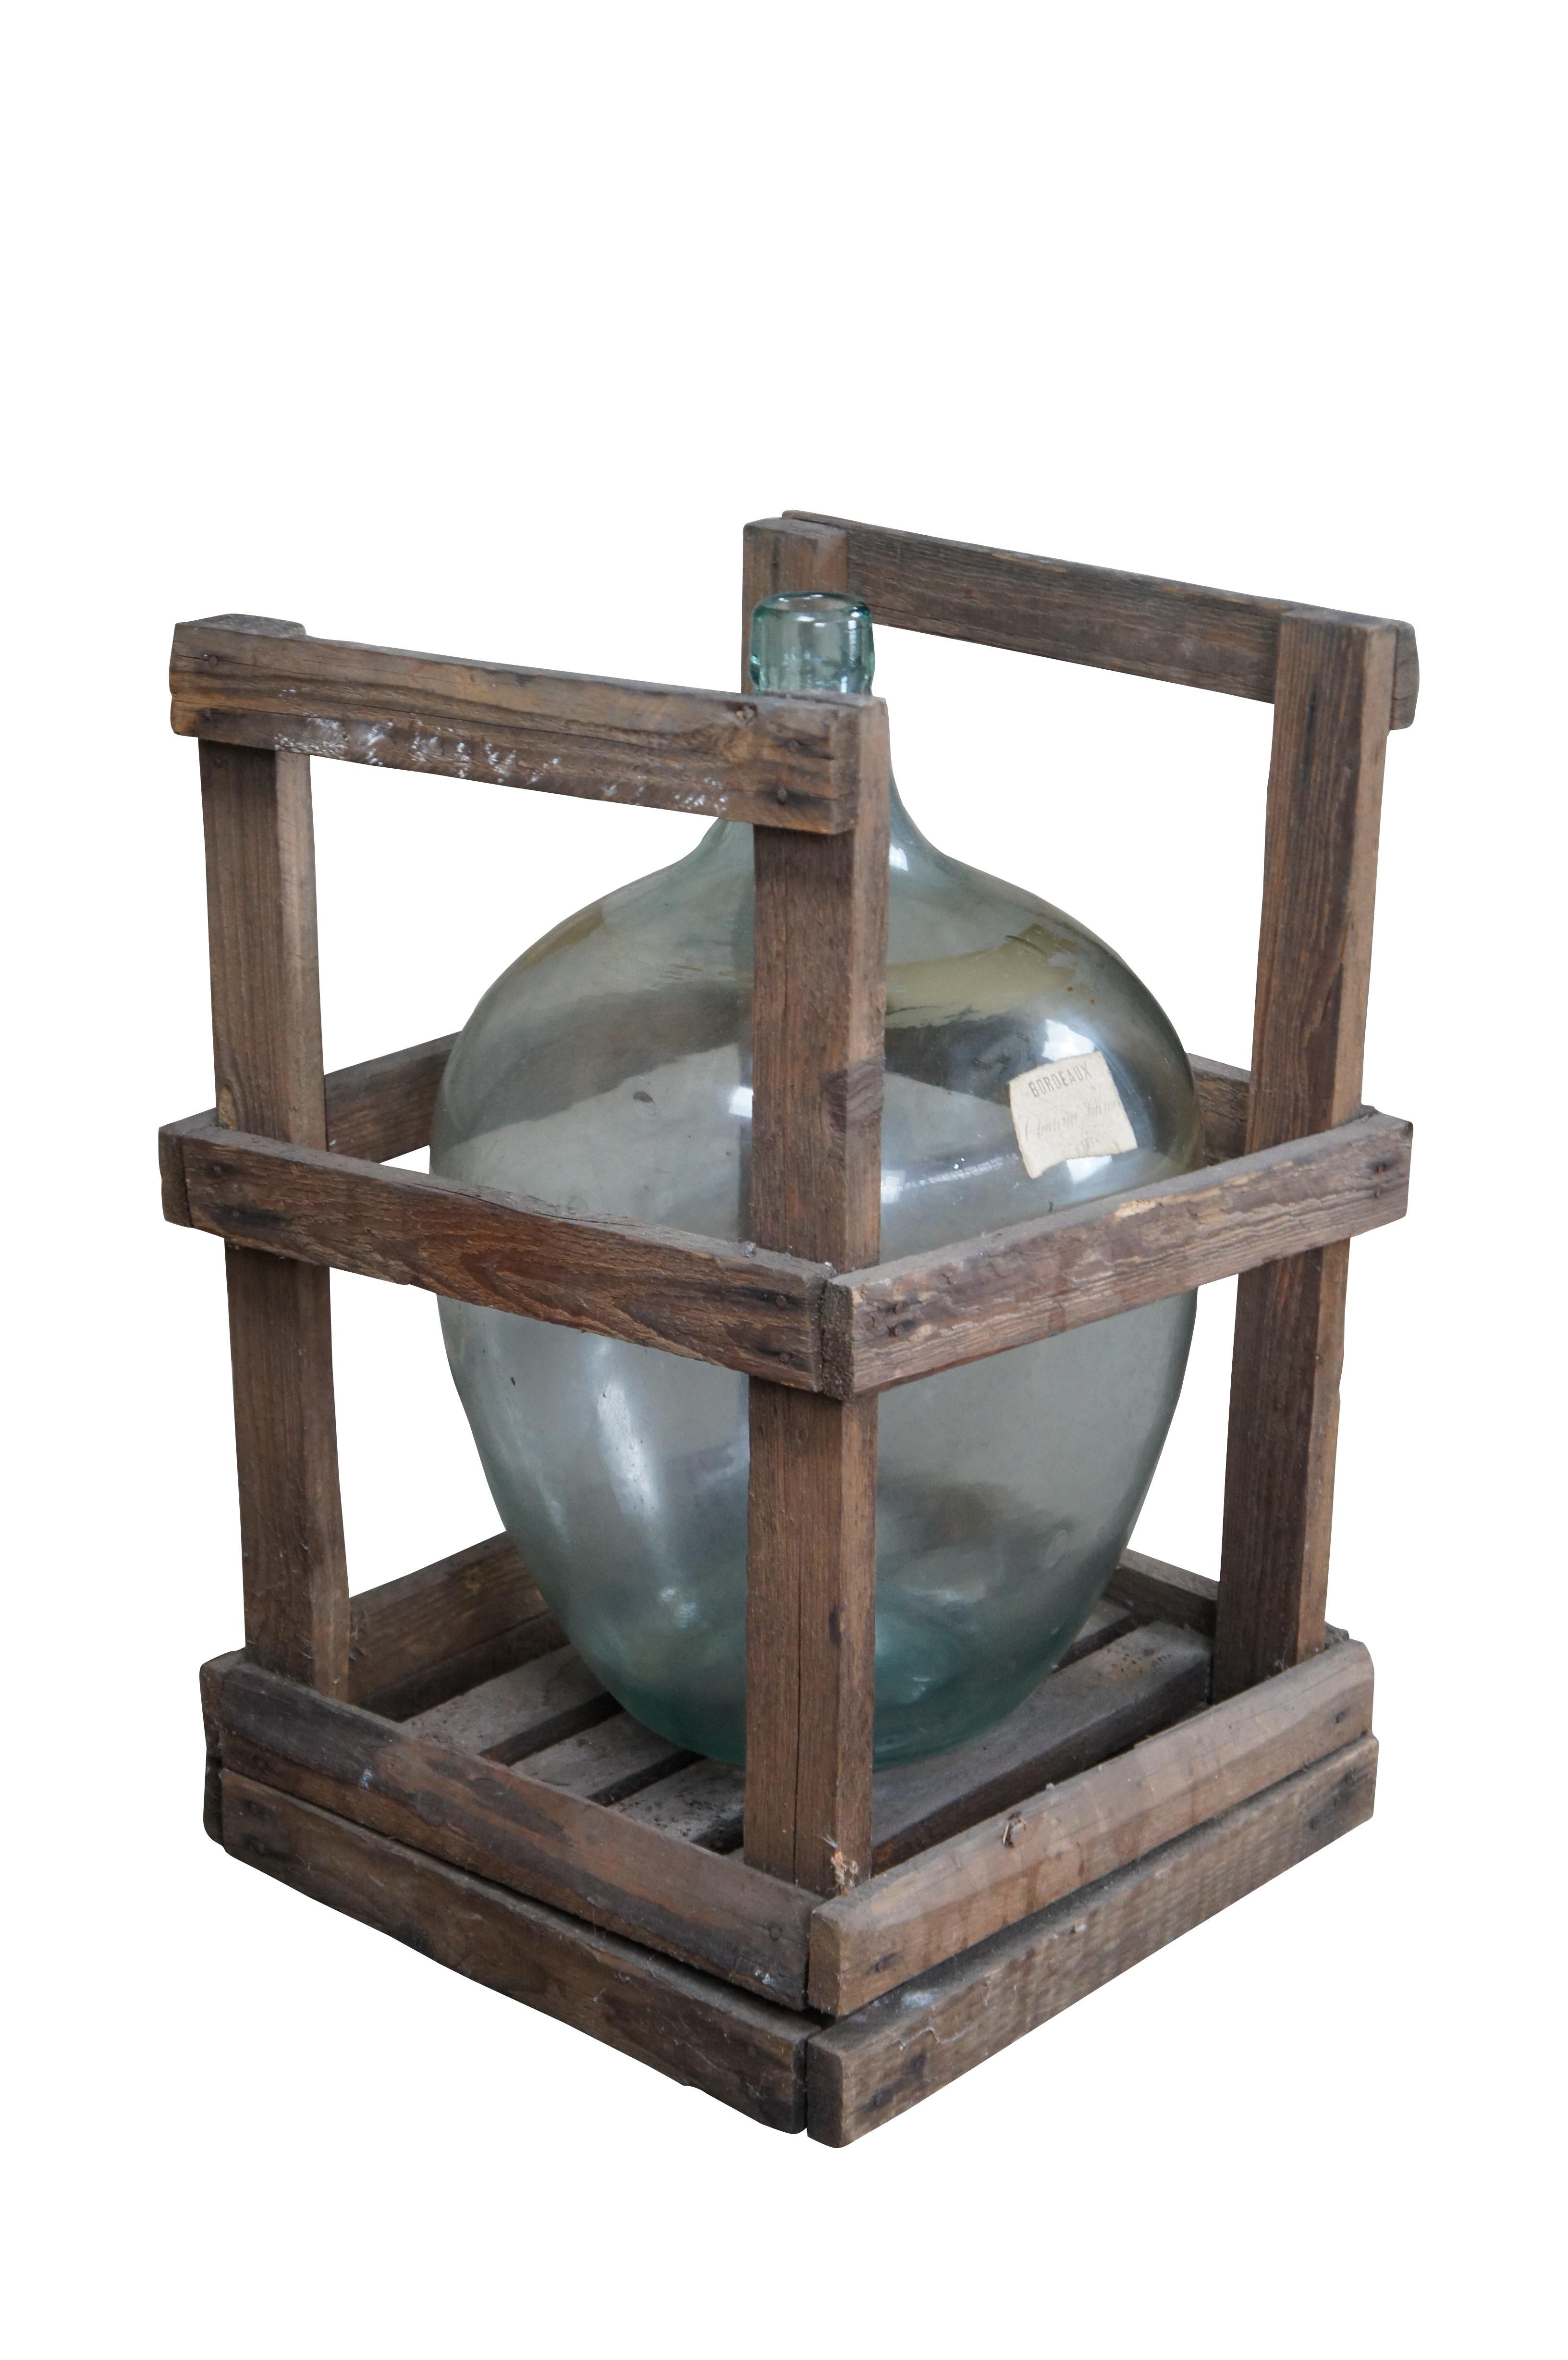 French Provincial Antique French Hand Blown Glass Demijohn Bordeaux Wine Bottle Jug & Wood Crate For Sale